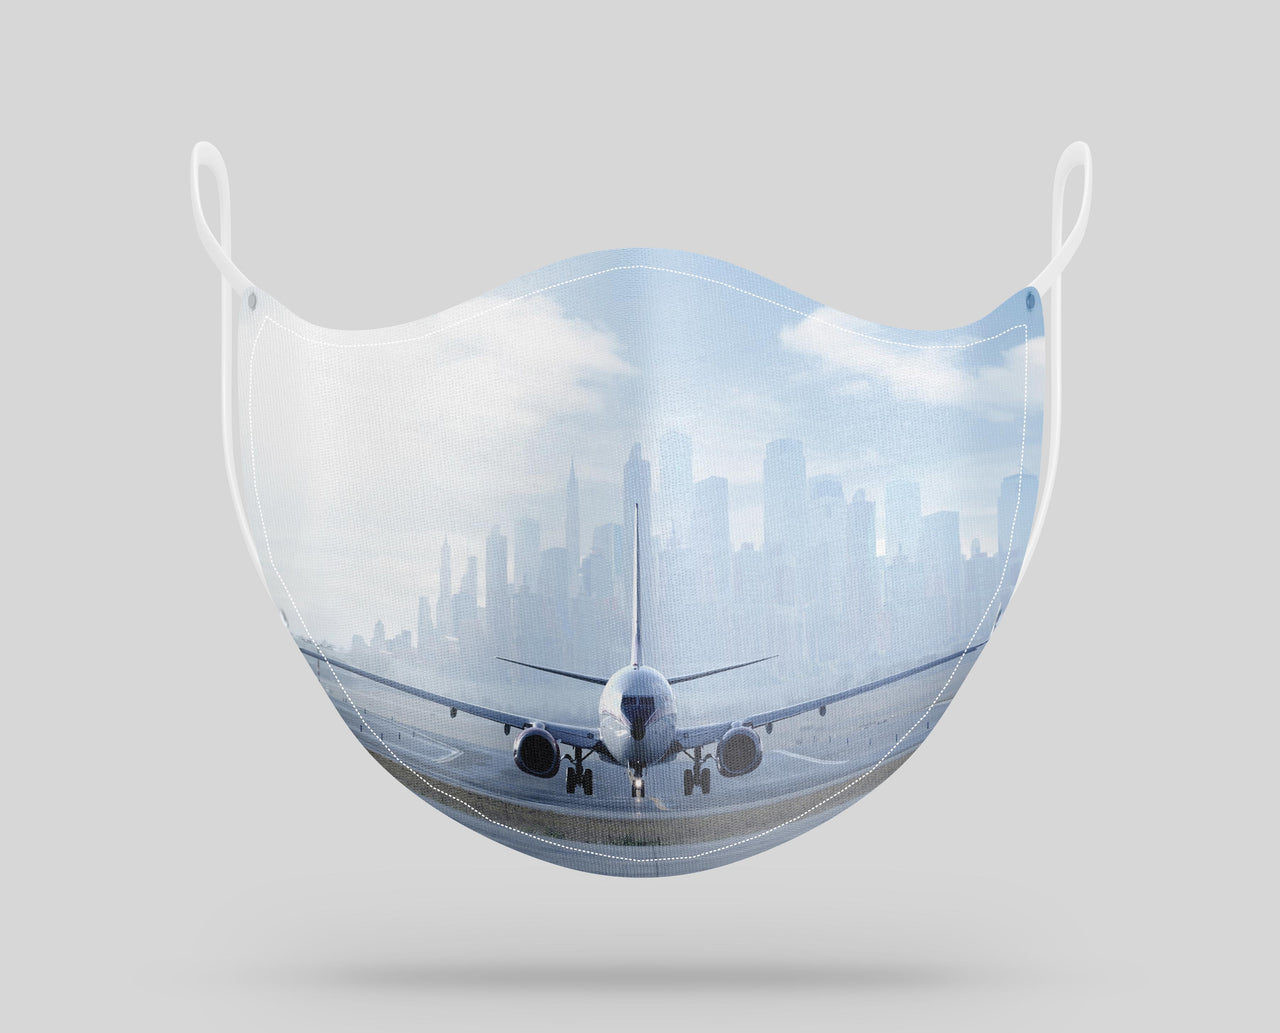 Boeing 737 & City View Behind Designed Face Masks